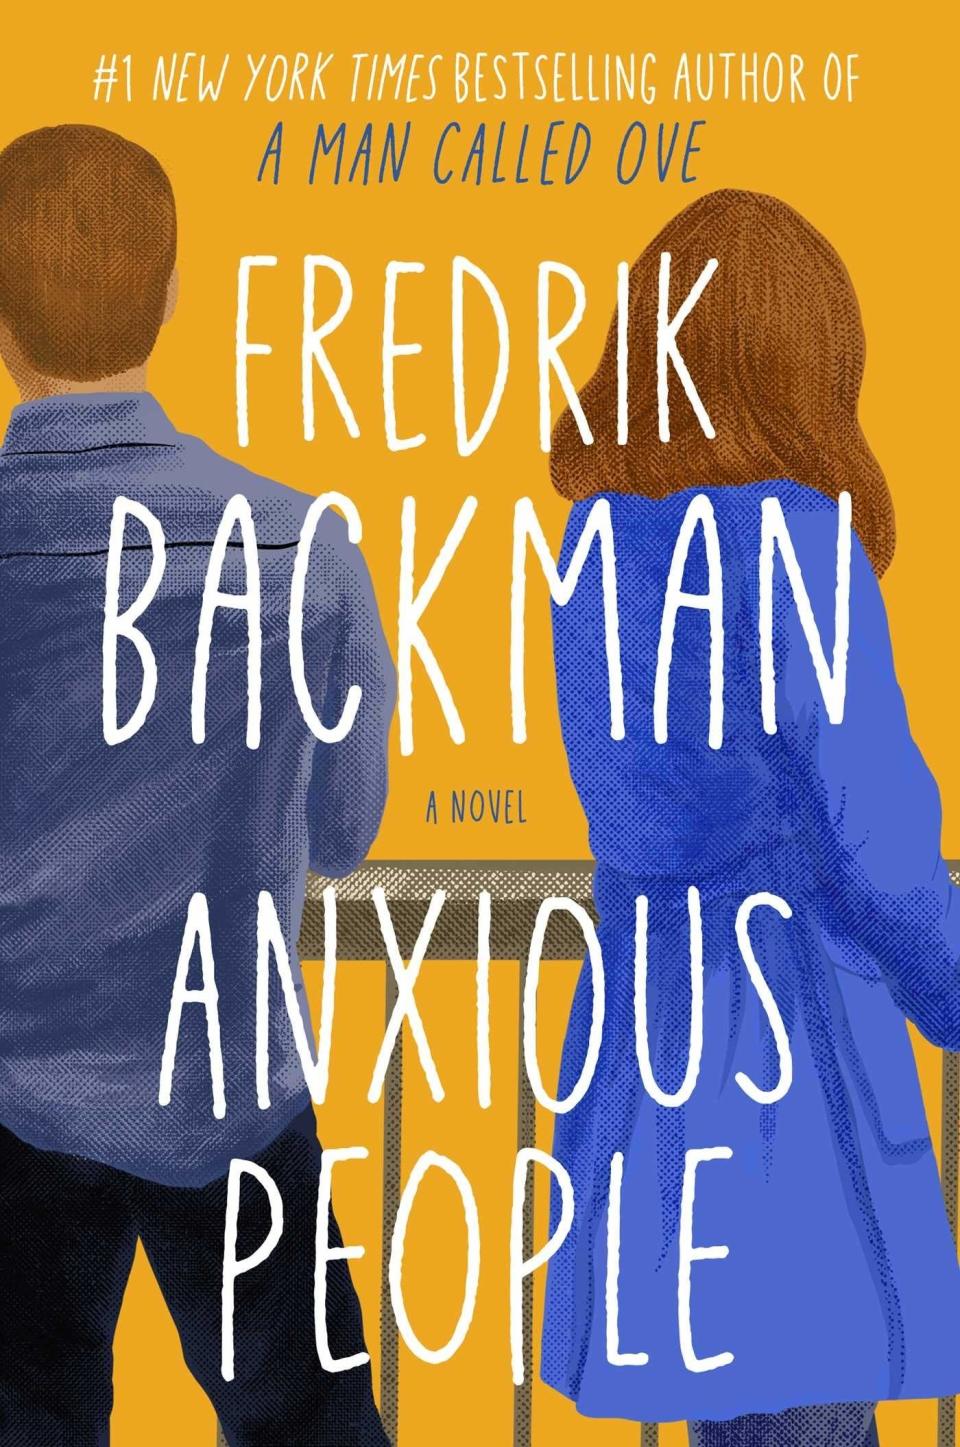 This was my favorite read of 2020, mainly because I really needed something as uplifting and hopeful as Anxious People. When a robber accidentally takes an apartment full of potential buyers hostage after a failed bank heist, each person — from the bickering young couple to the wealthy, cold banker to even the robber — will have to face the things in their lives that are threatening to boil over. It's a fun, charming story that will have you on the edge of your seat, but also a poignant look into what makes us human and what that humanity means we owe to one another. —Kirby Beaton